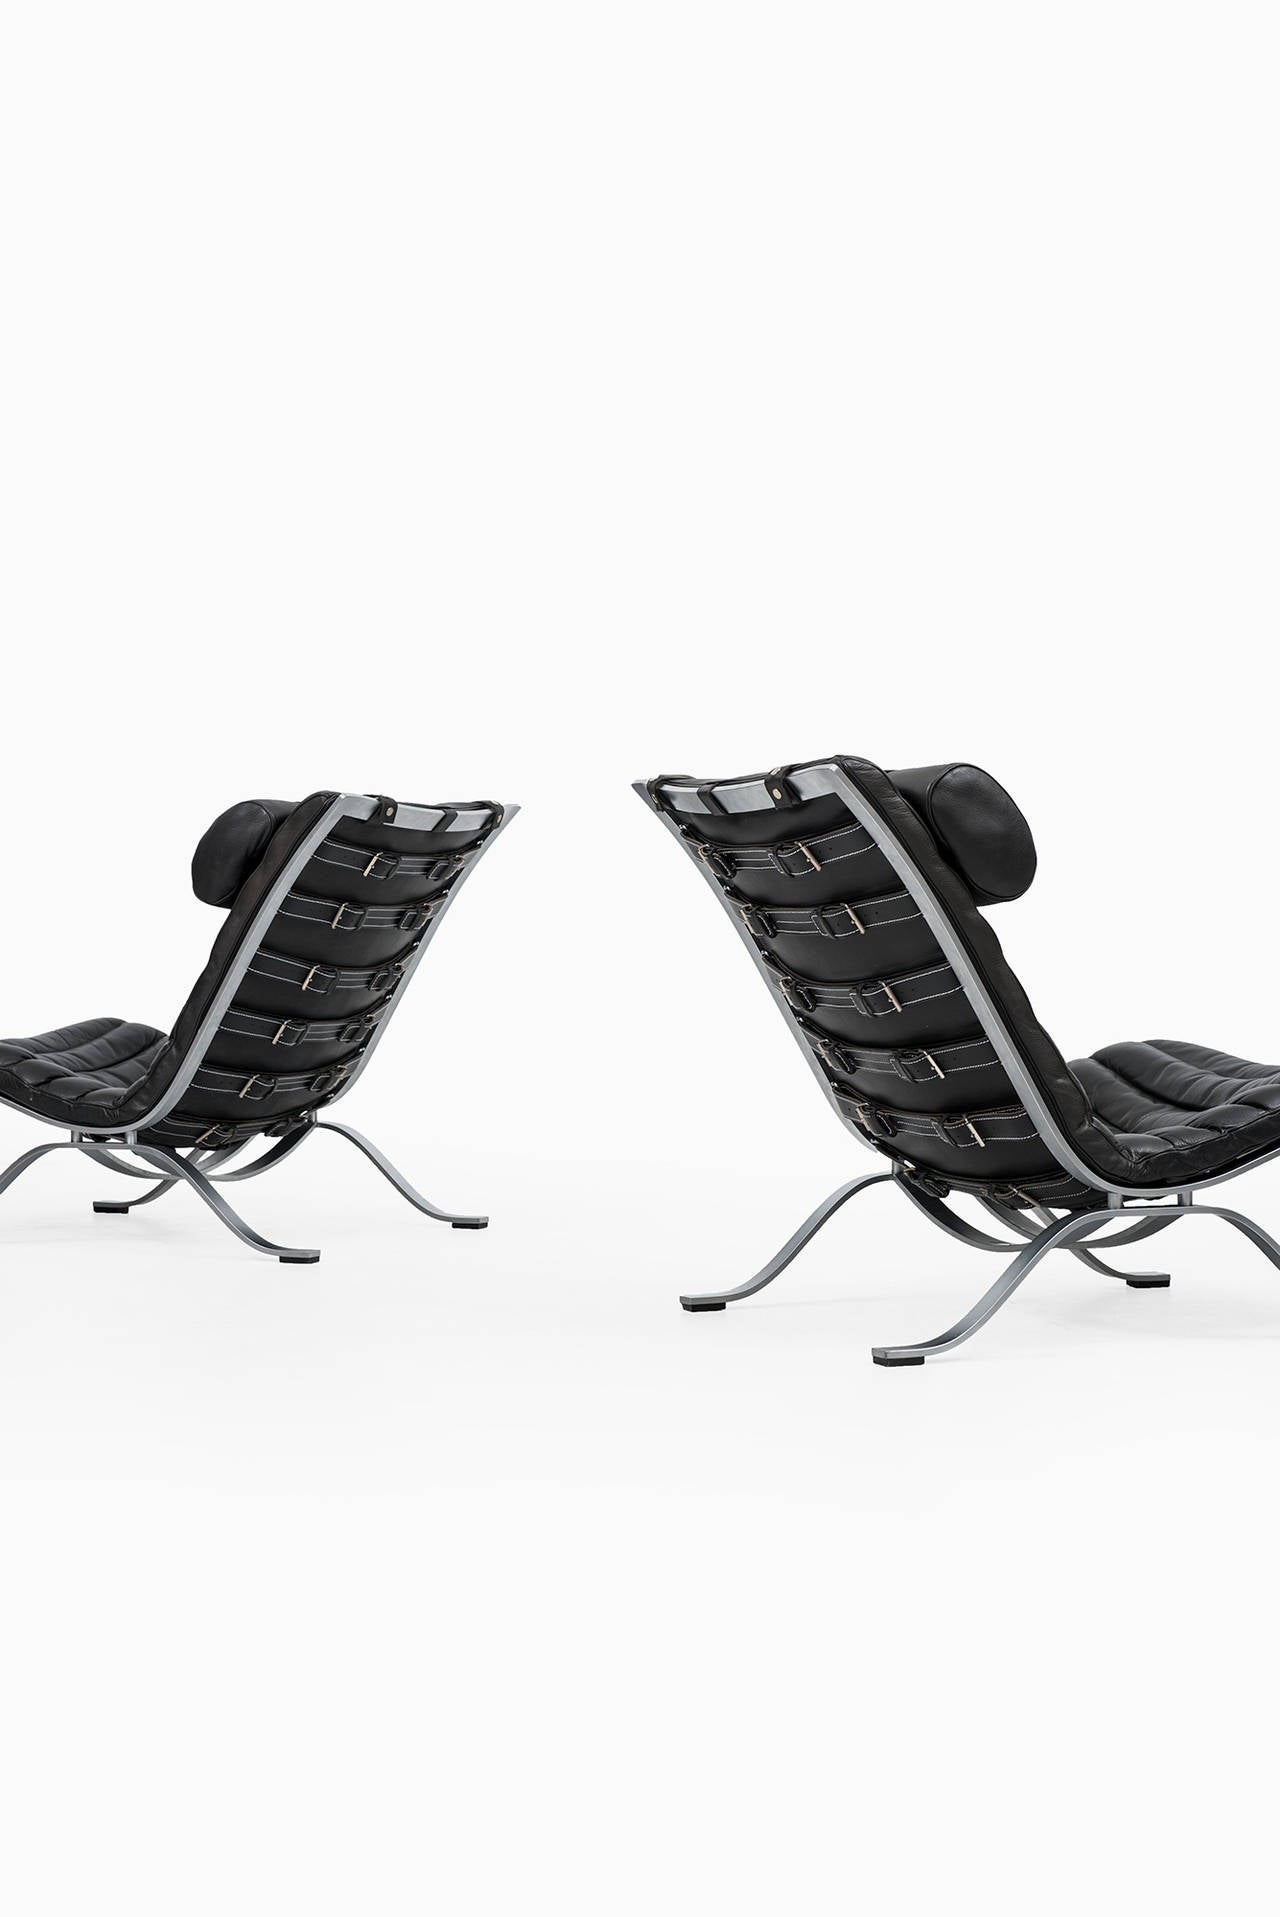 Mid-20th Century Arne Norell Ari Easy Chairs in Black Leather by Norell AB in Sweden